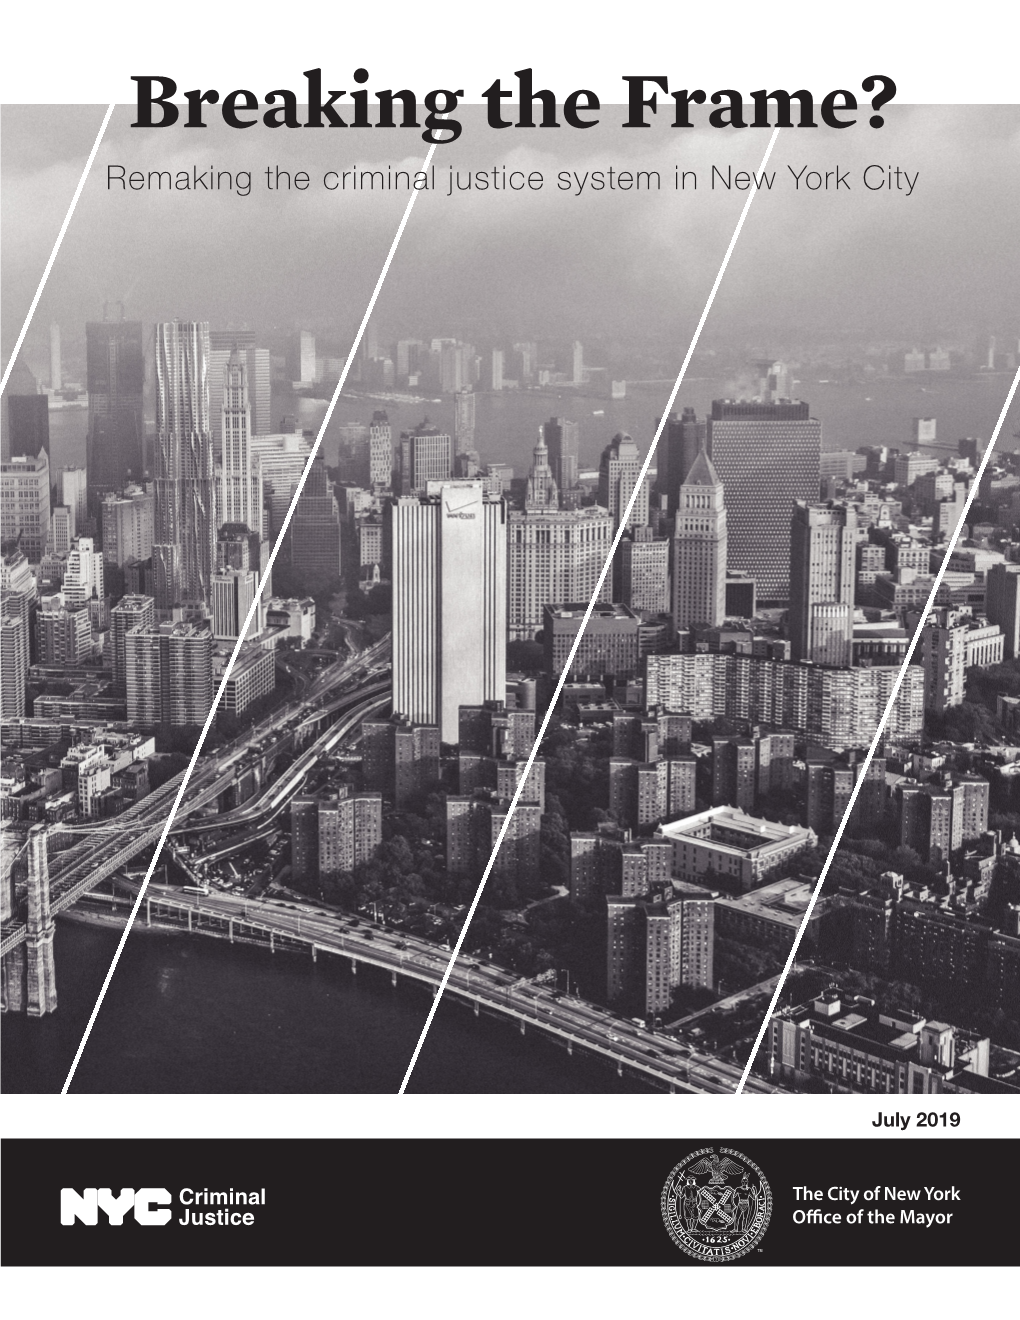 Breaking the Frame? Remaking the Criminal Justice System in New York City